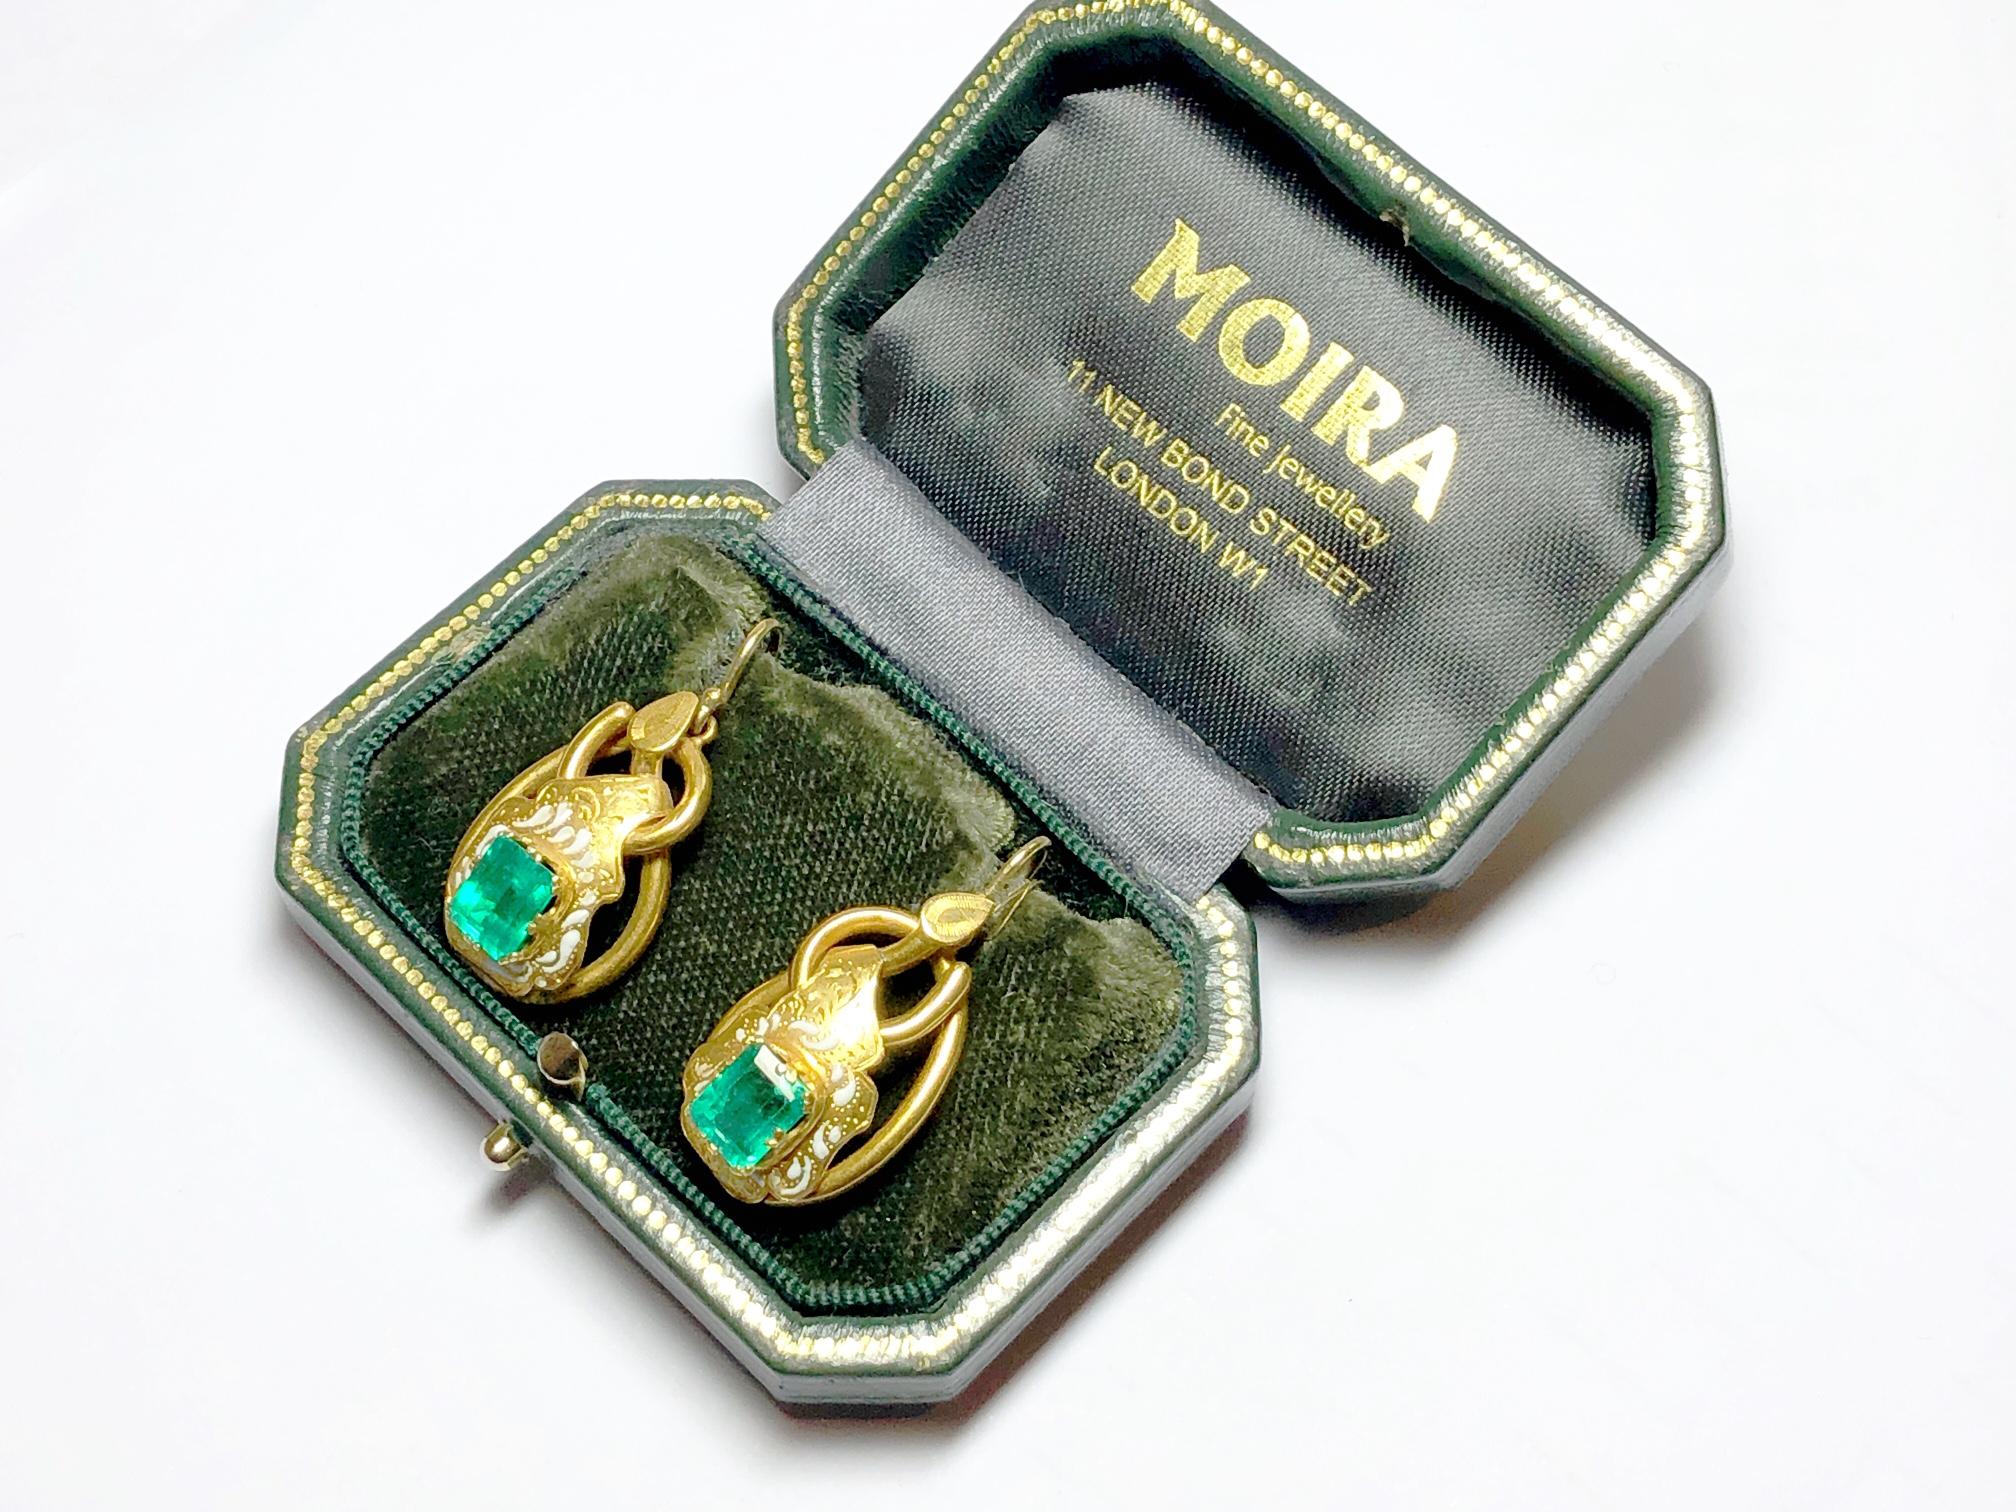 A pair of antique emerald and gold earrings, with a central emerald-cut emerald, weighing an estimated 1.40ct each, surrounded by an ornate engraved panel with white enamel detail, mounted on a gold double loop, French wire fittings. Circa 1880.